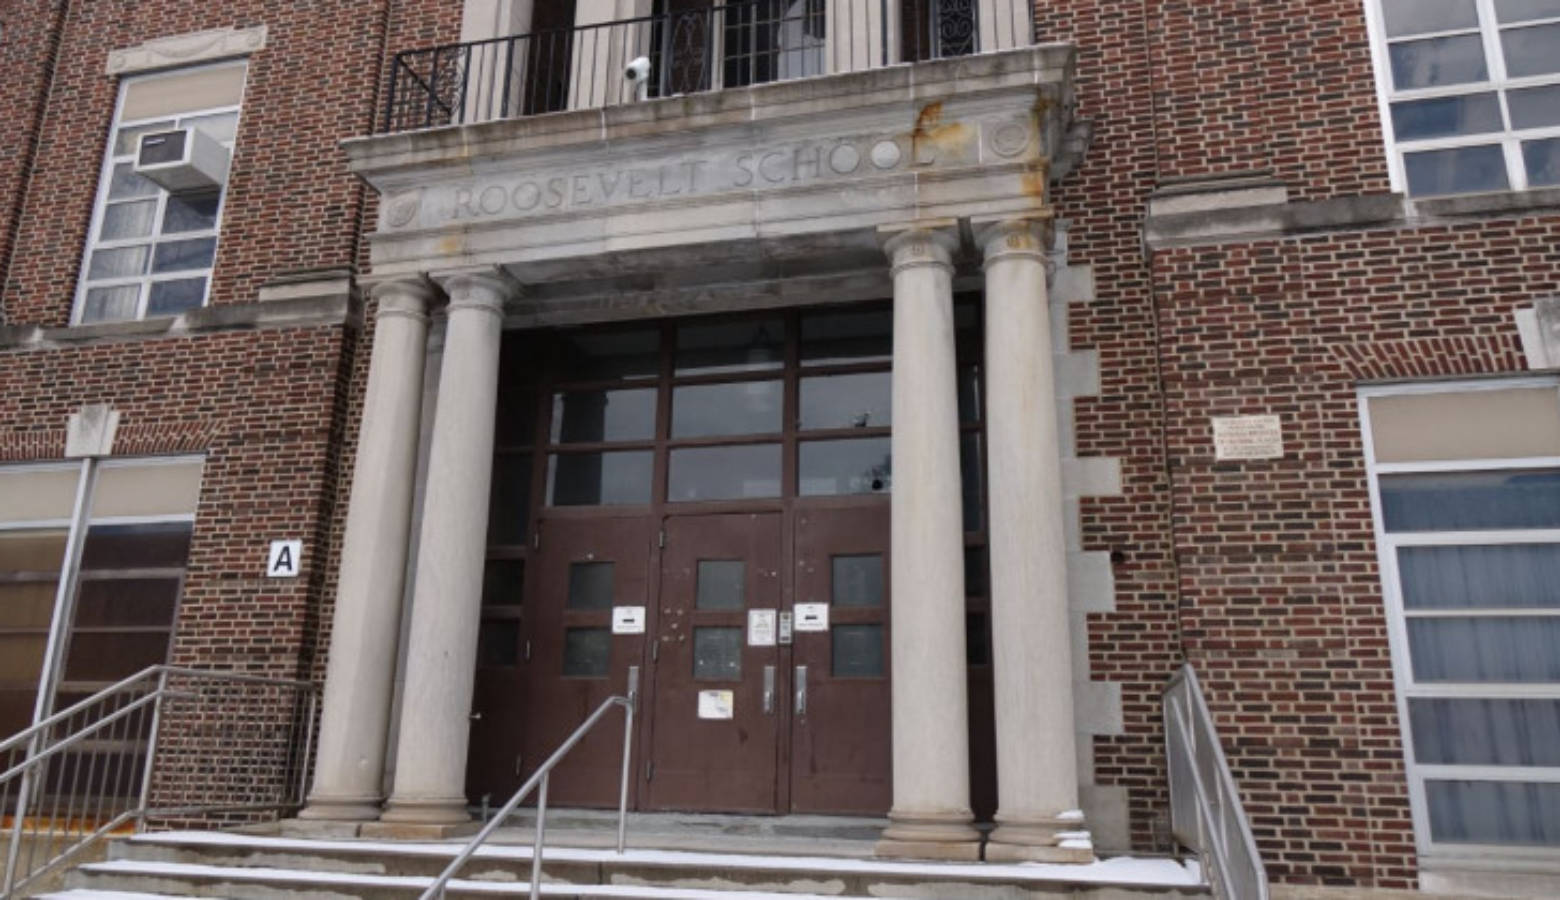 Classes have not been held at Theodore Roosevelt College & Career Academy since March 2019, when water pipes burst during a subzero winter storm and caused more than $10 million in damages.